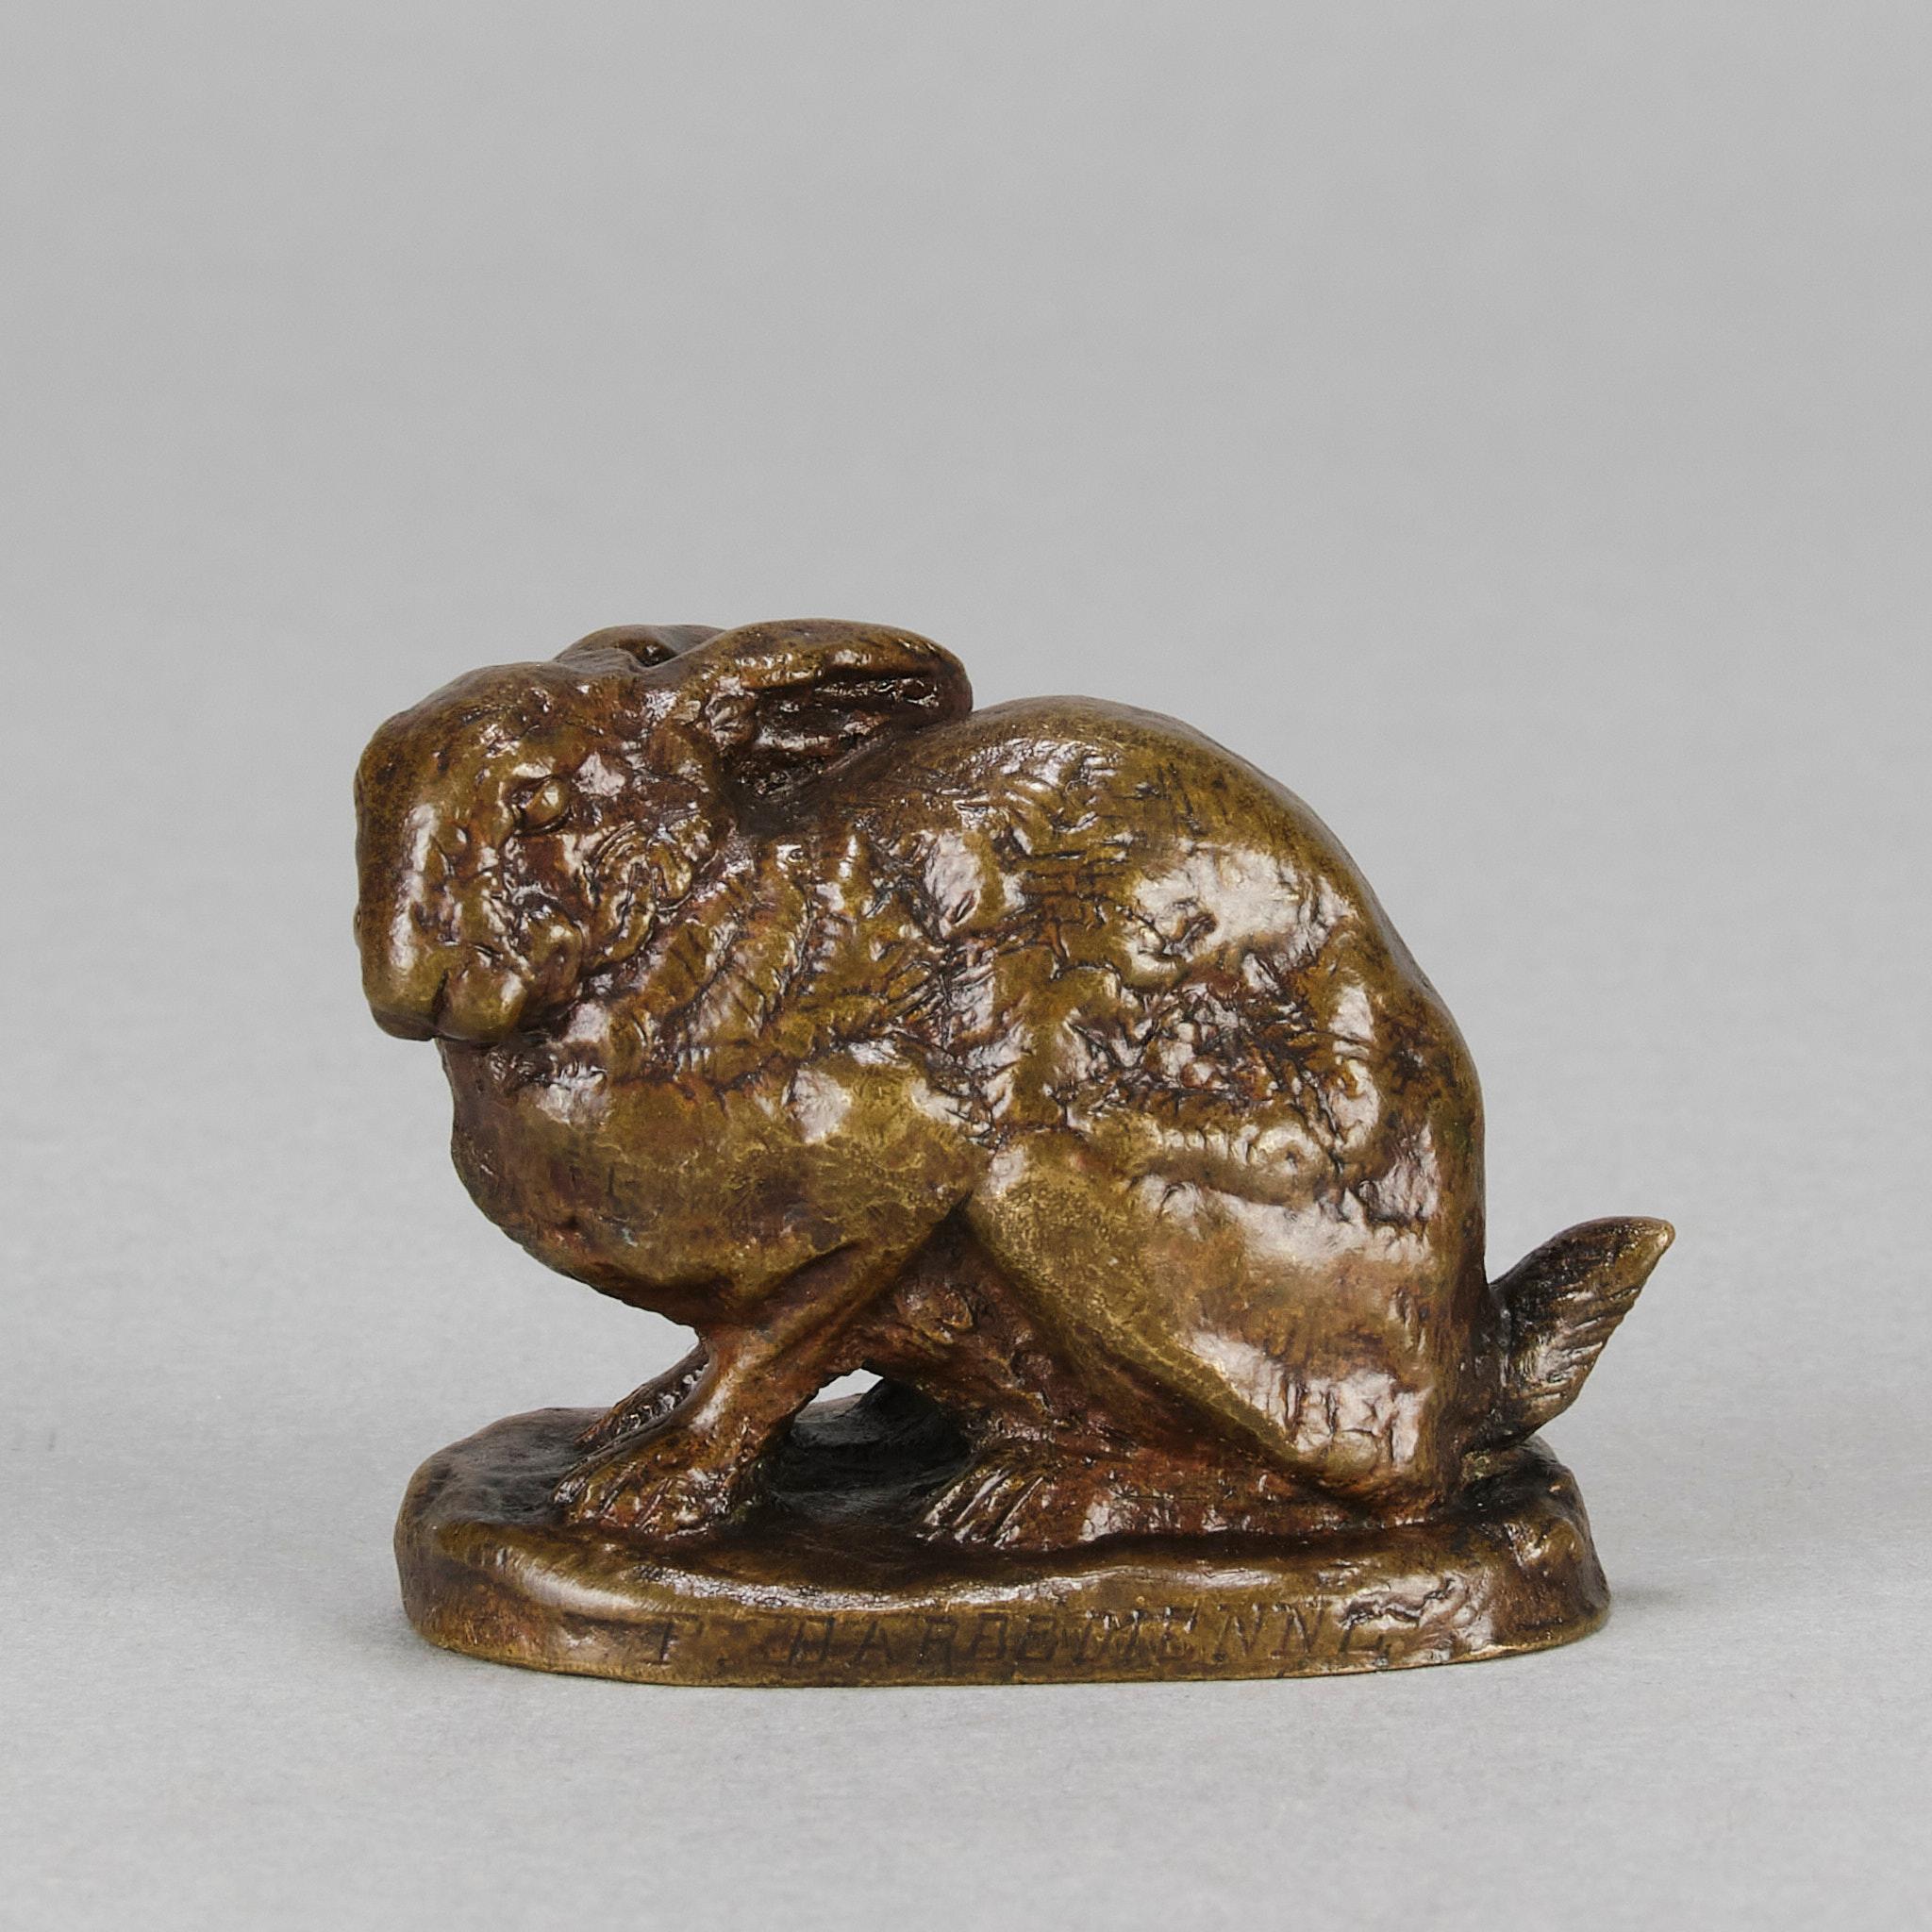 Wonderful mid 19th Century French animalier bronze study of a seated rabbit in a timid position. The surface has a rich green and brown variegated patina and excellent hand chased detail, signed Barye and inscribed F Barbedienne

ADDITIONAL